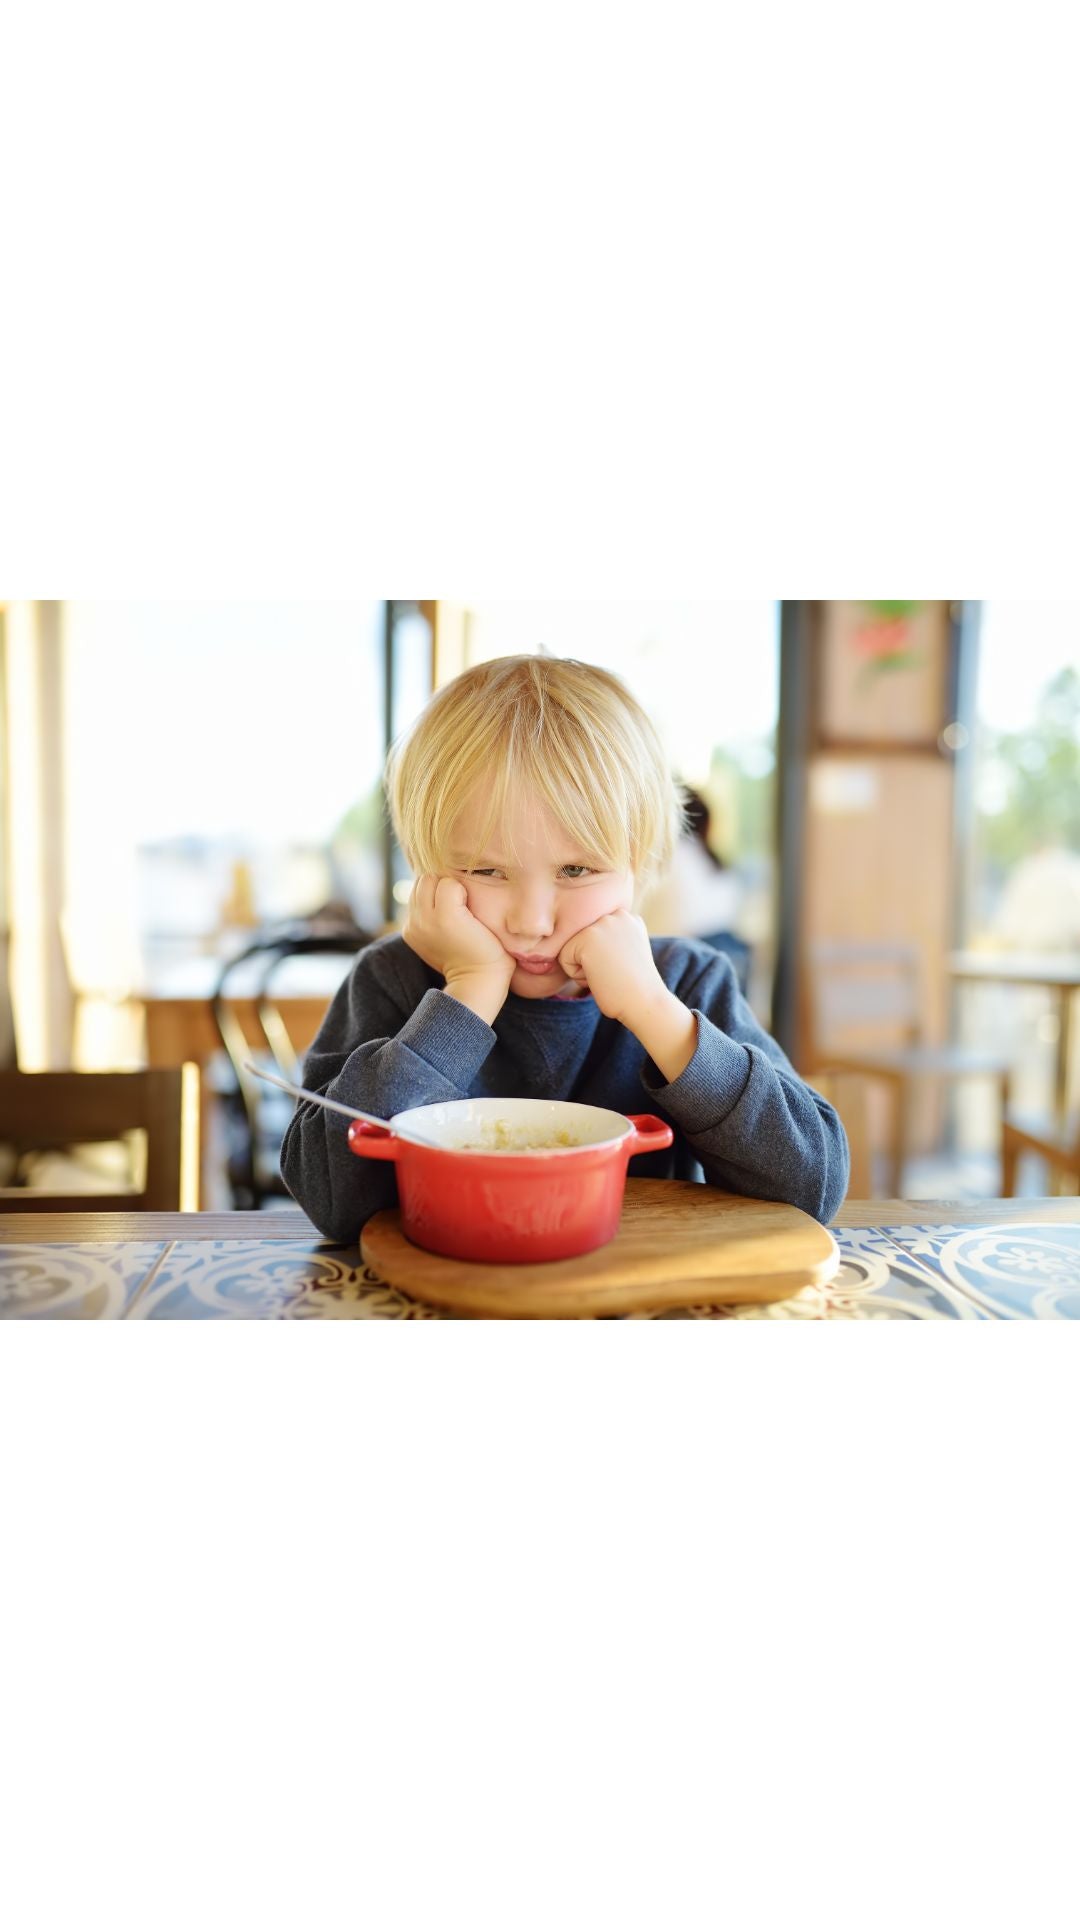 Have you lost the joy in cooking for your picky eater? 5 tips to get your joy back